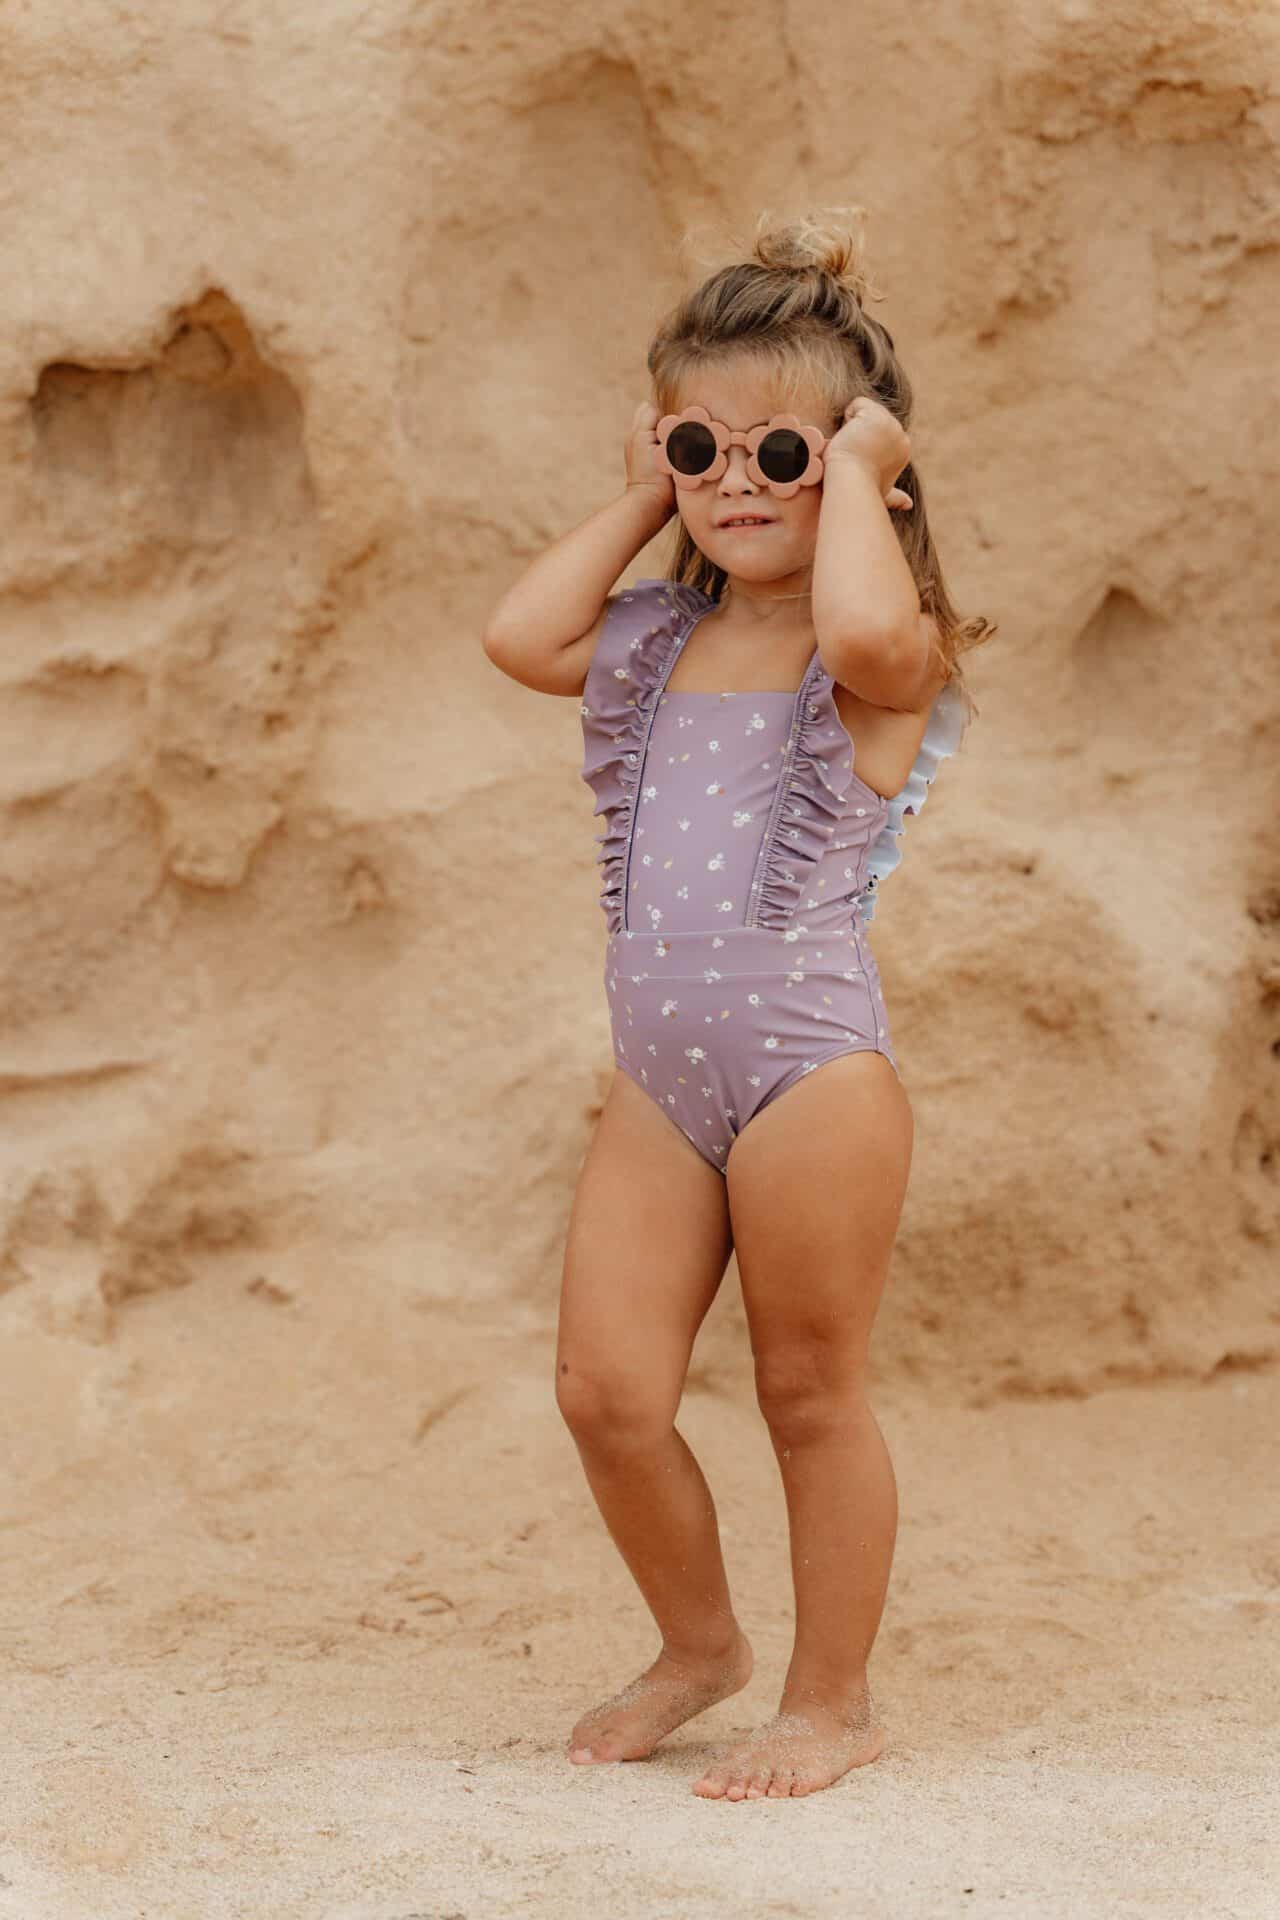 Child wearing Little Dutch mauve swimsuit with straps, standing on sandy beach with rocky background